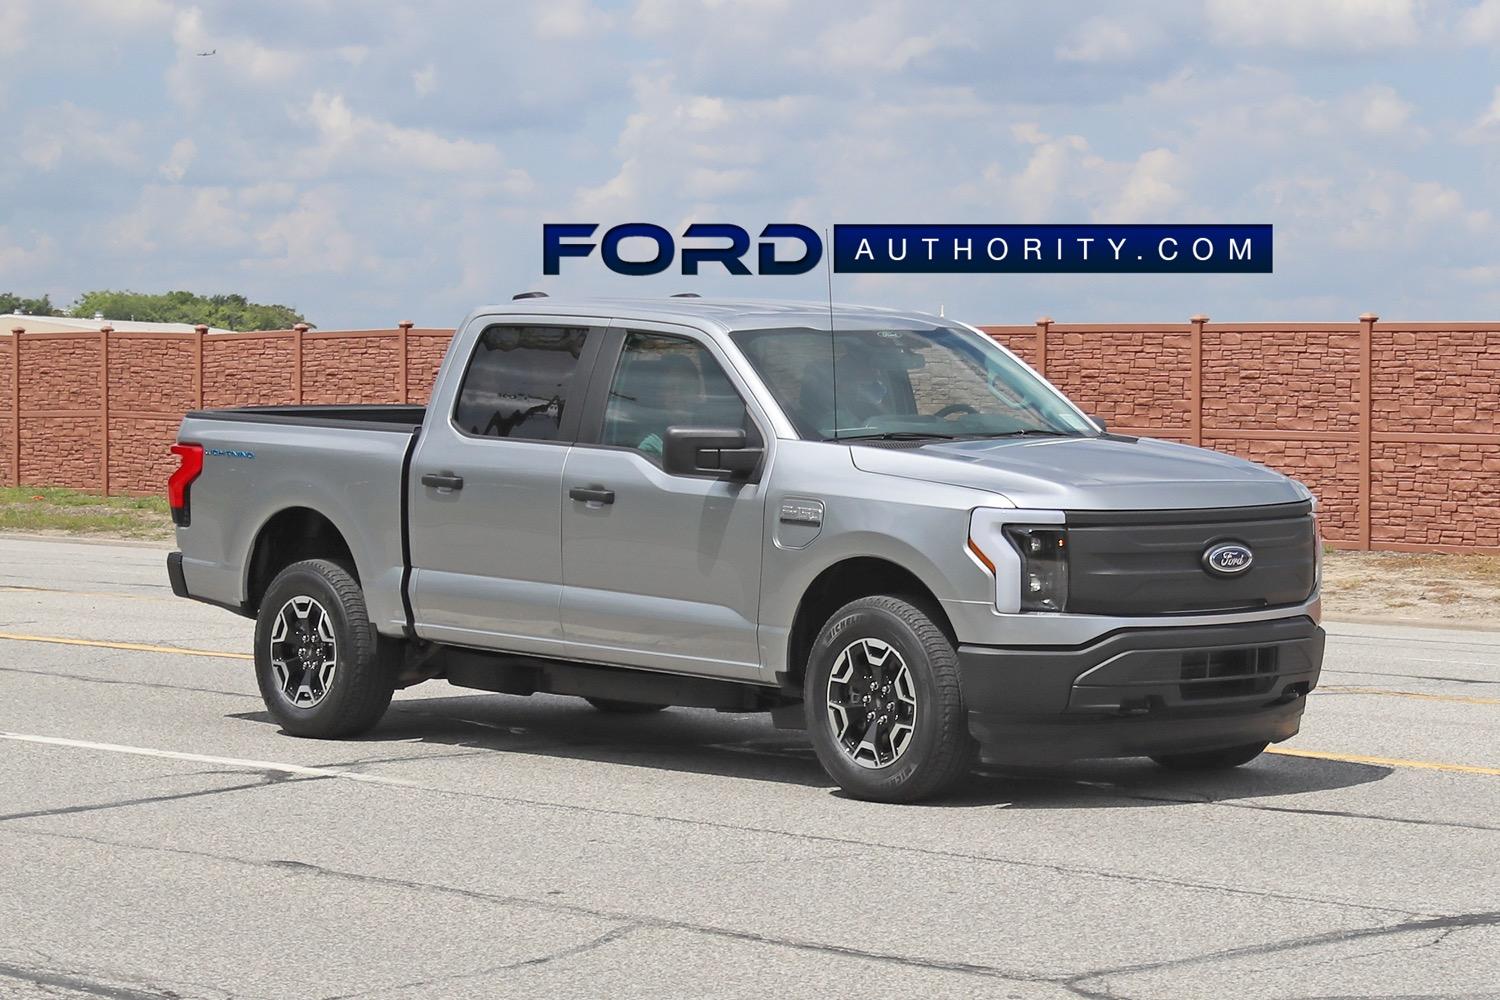 Ford F-150 Lightning ICONIC SILVER F-150 Lightning Photos & Club 2022-Ford-F-150-Lightning-Pro-Iconic-Silver-Real-World-Pictures-Exterior-002